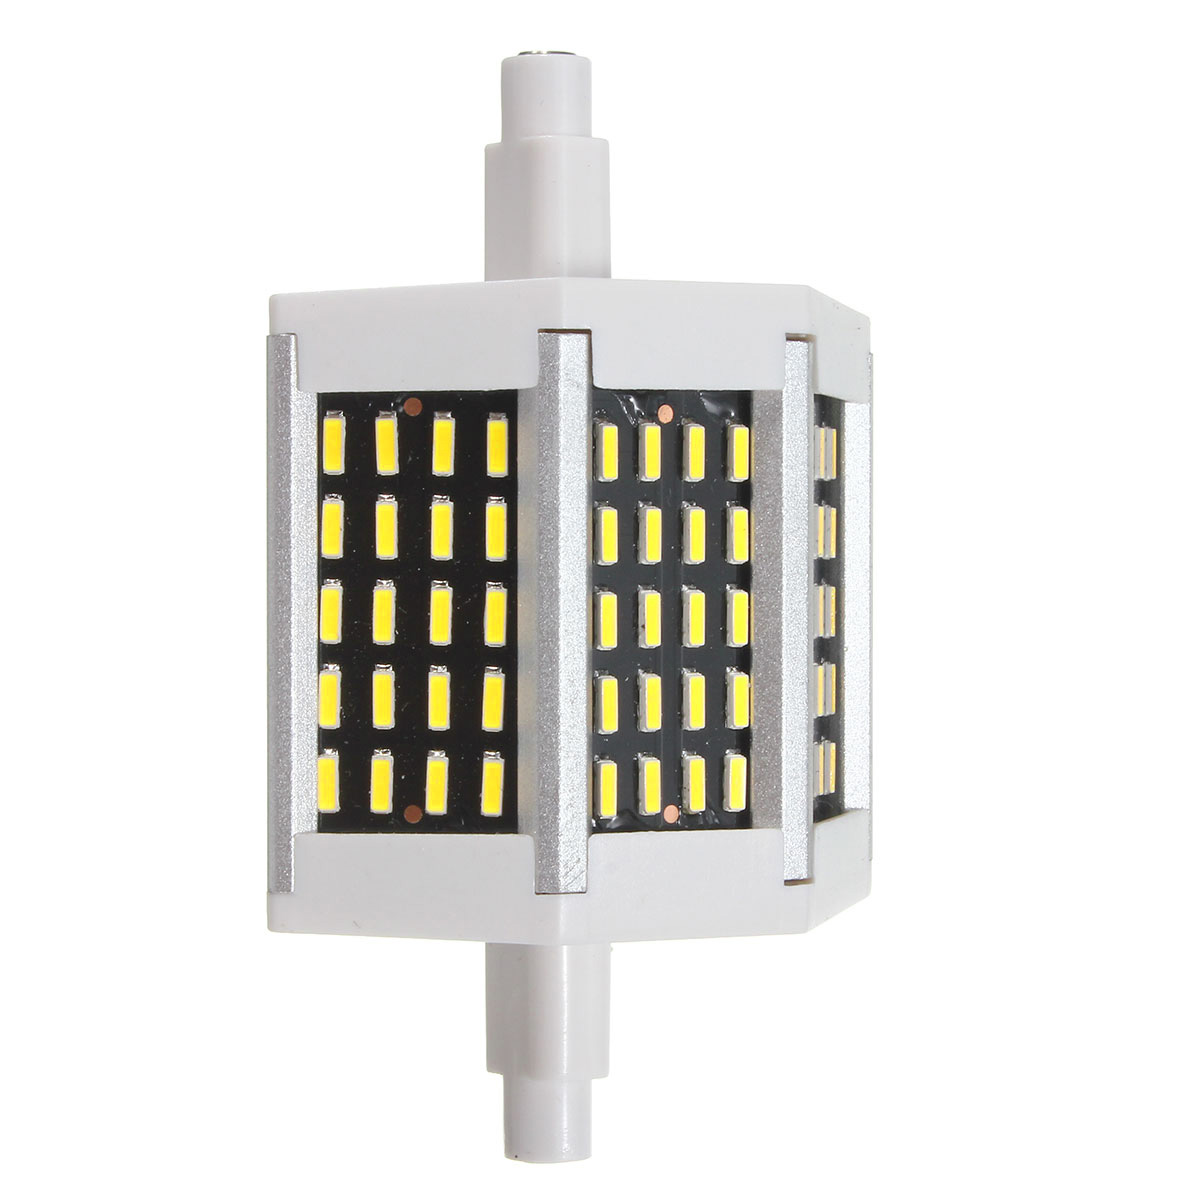 Dimmable-R7S-78mm-8W-60-SMD-4014-LED-Black-Plate-Warm-White-White-Lamp-Light-Bulb-AC220VAC110V-1051521-9